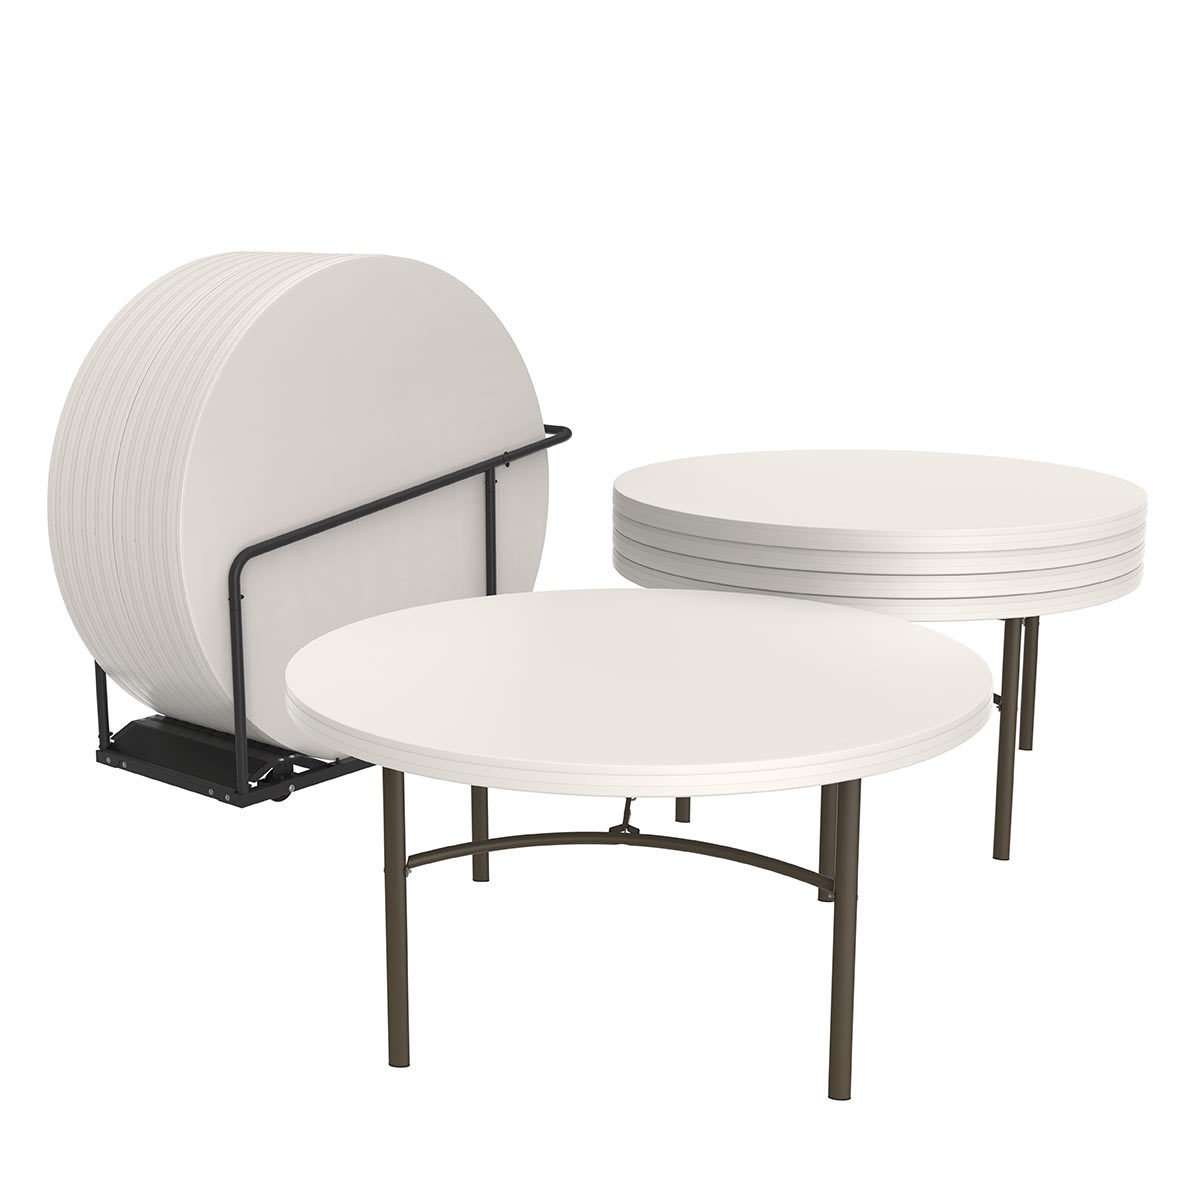 Lifetime 60" (5ft) Round Table - 15 Pack, with 1 Table Trolley